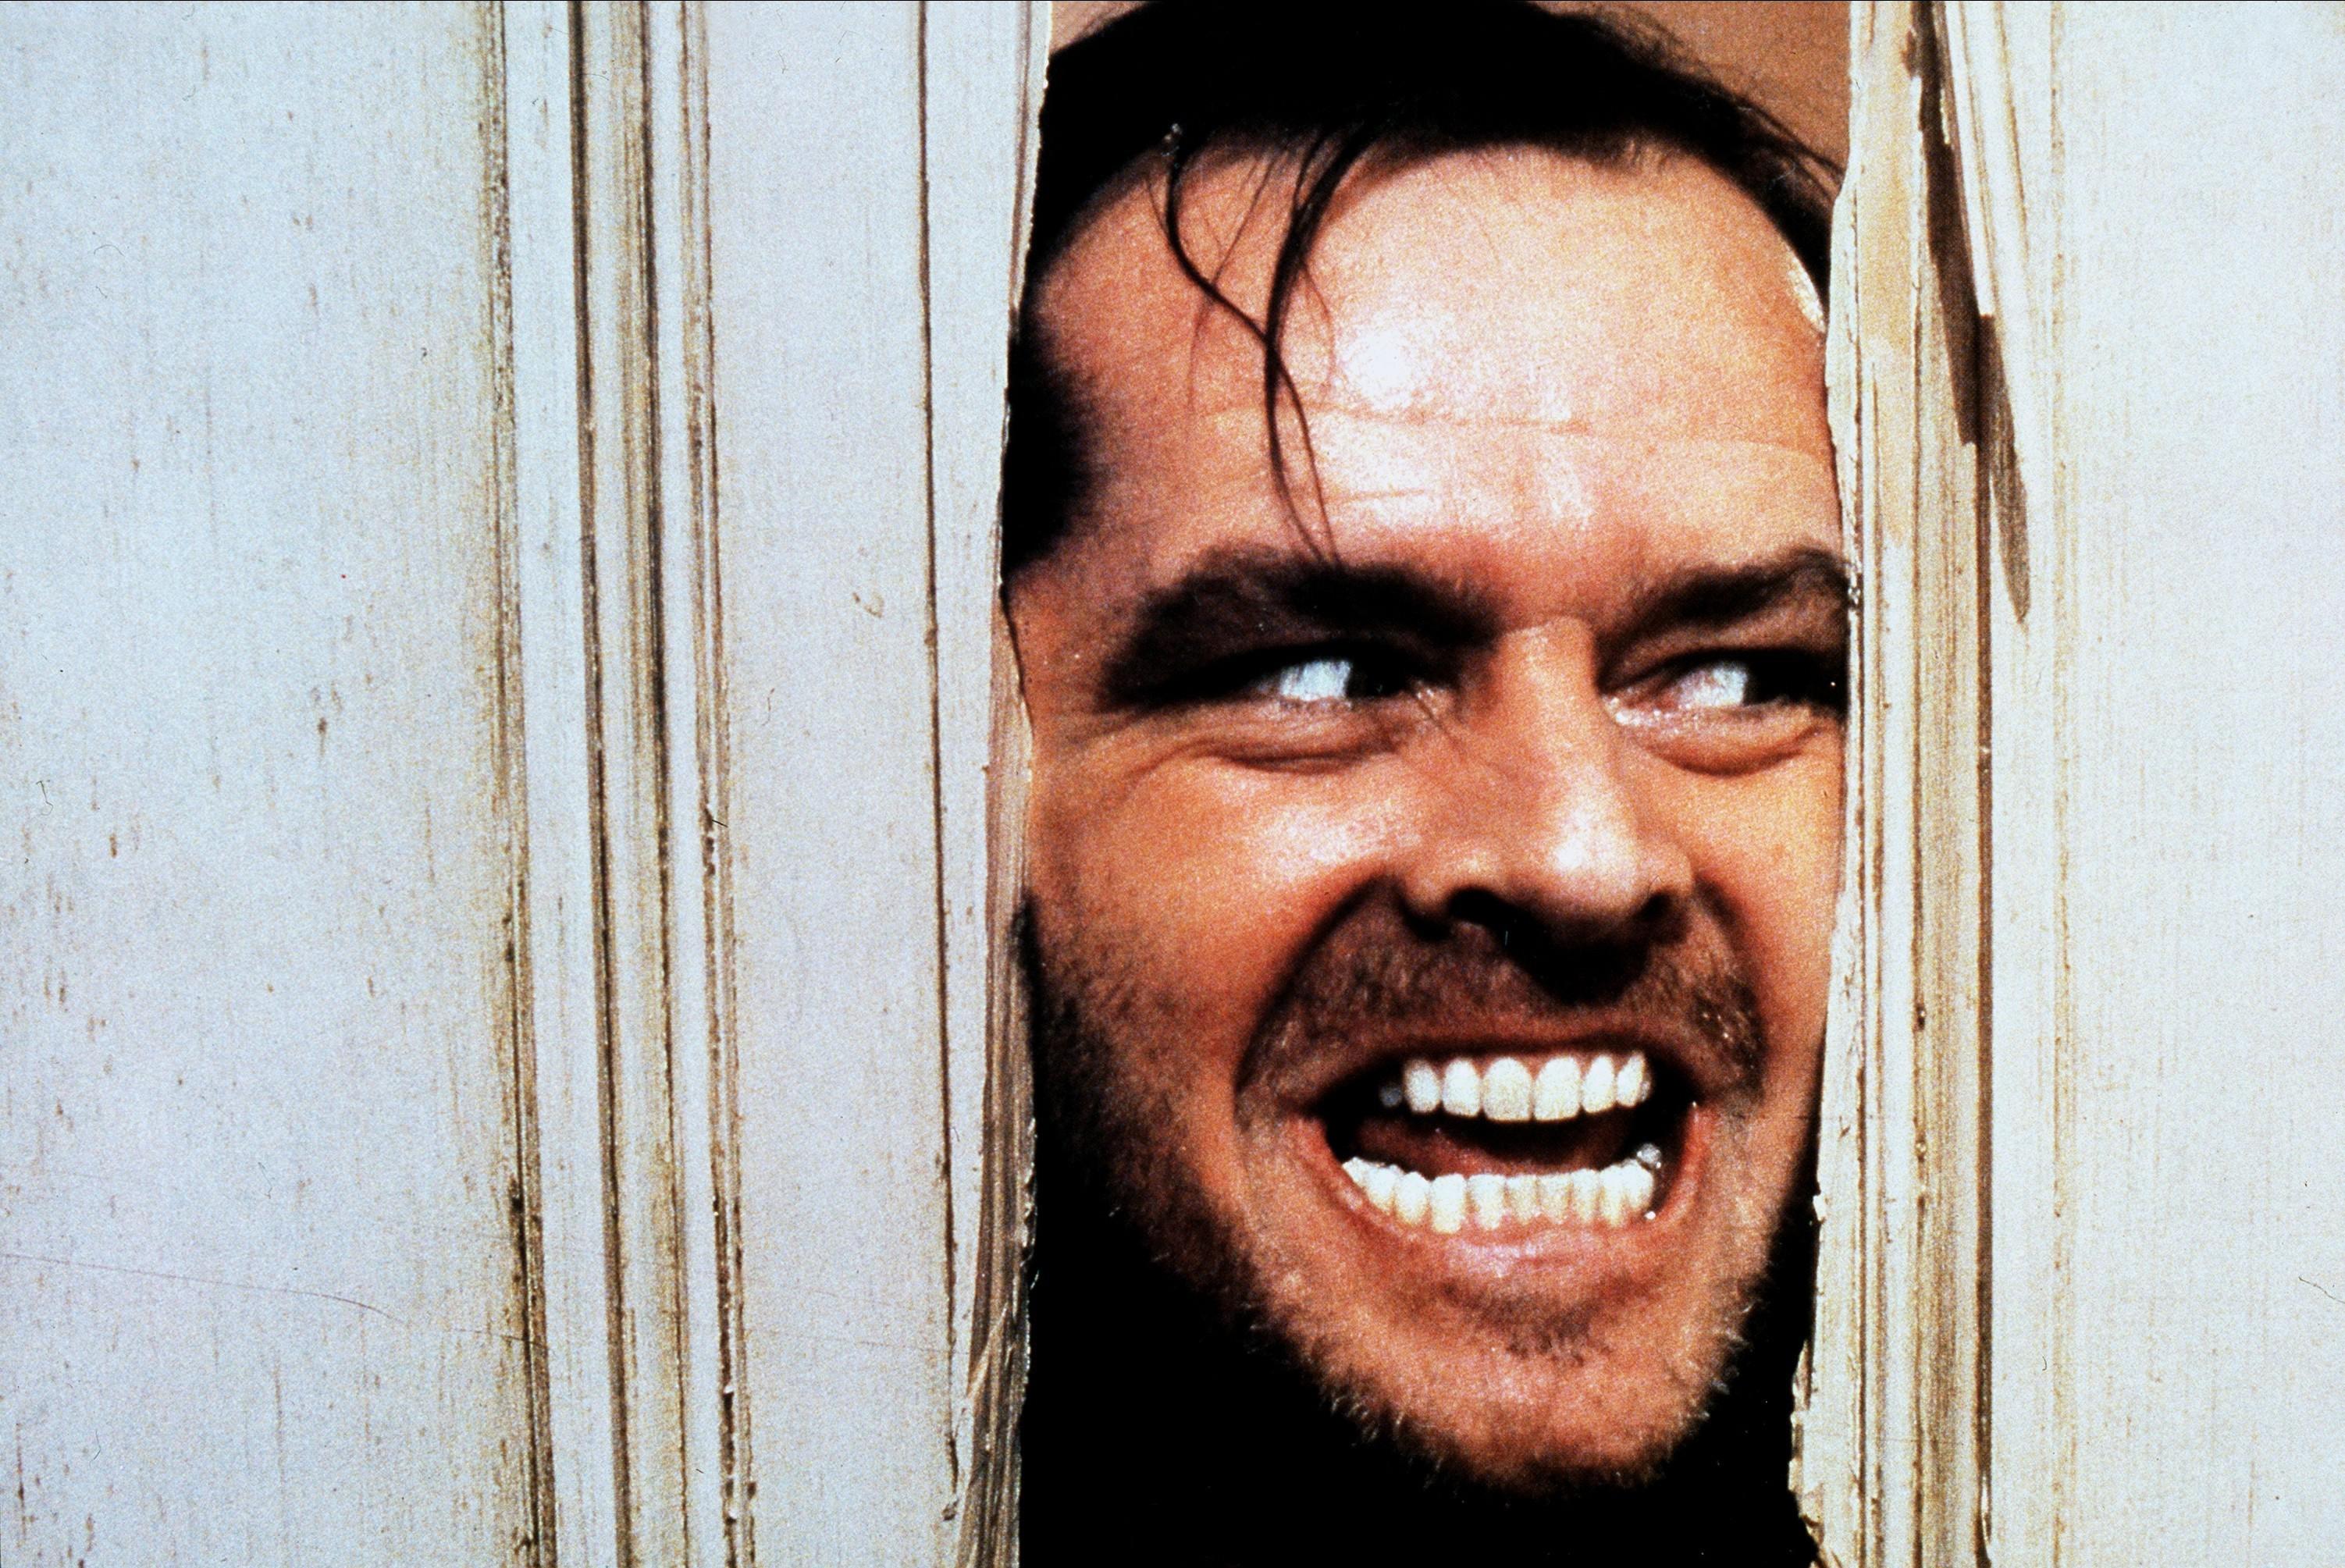 Jack Nicholoson in the iconic scene ‘Here’s Johnny’ scene in The Shining